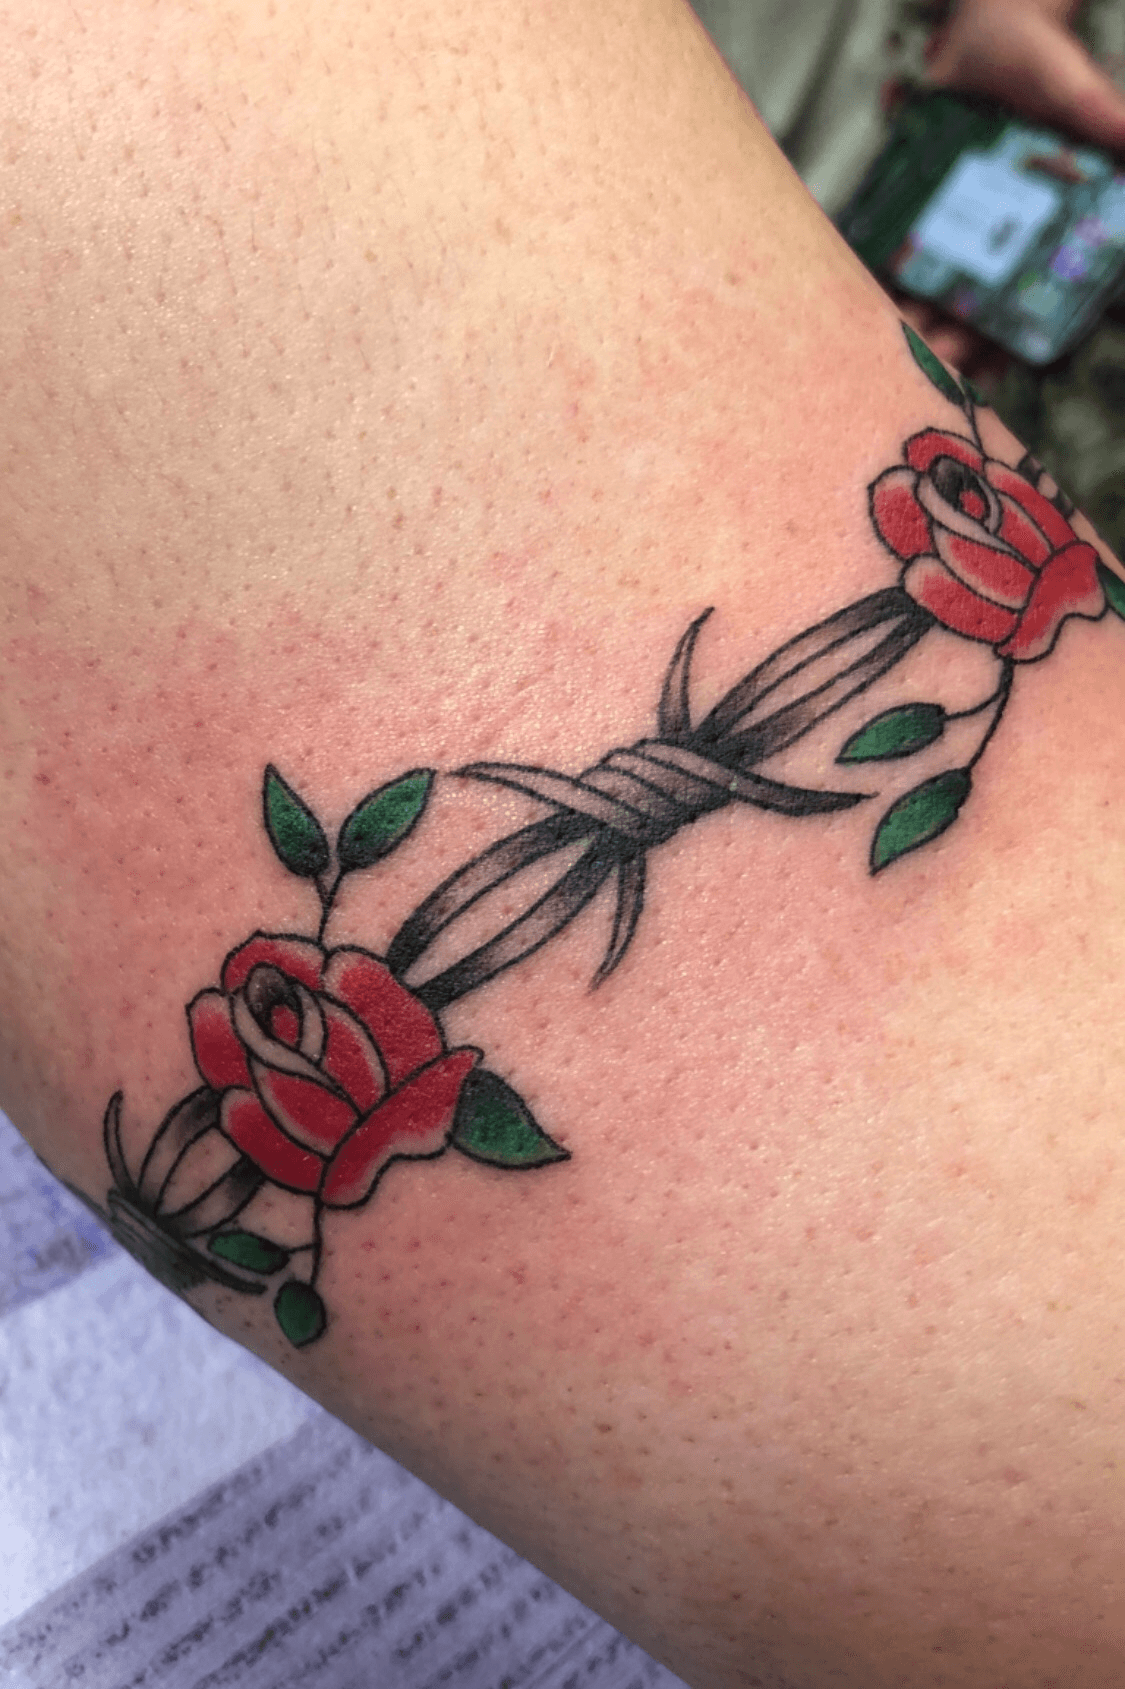 Tatoo of barb wire and roses